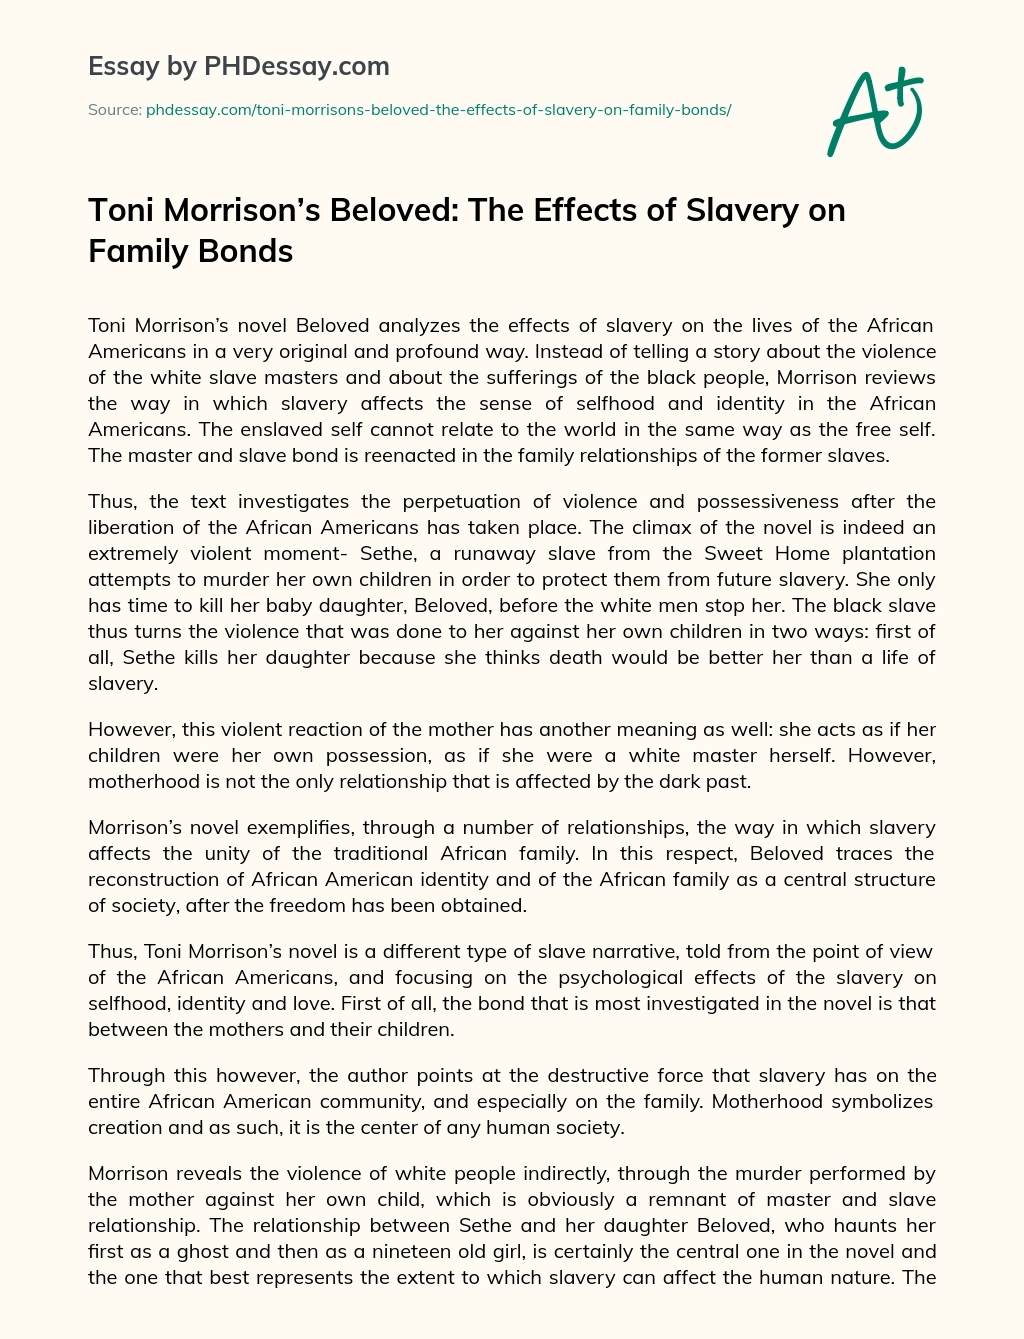 Toni Morrison’s Beloved: The Effects of Slavery on Family Bonds essay